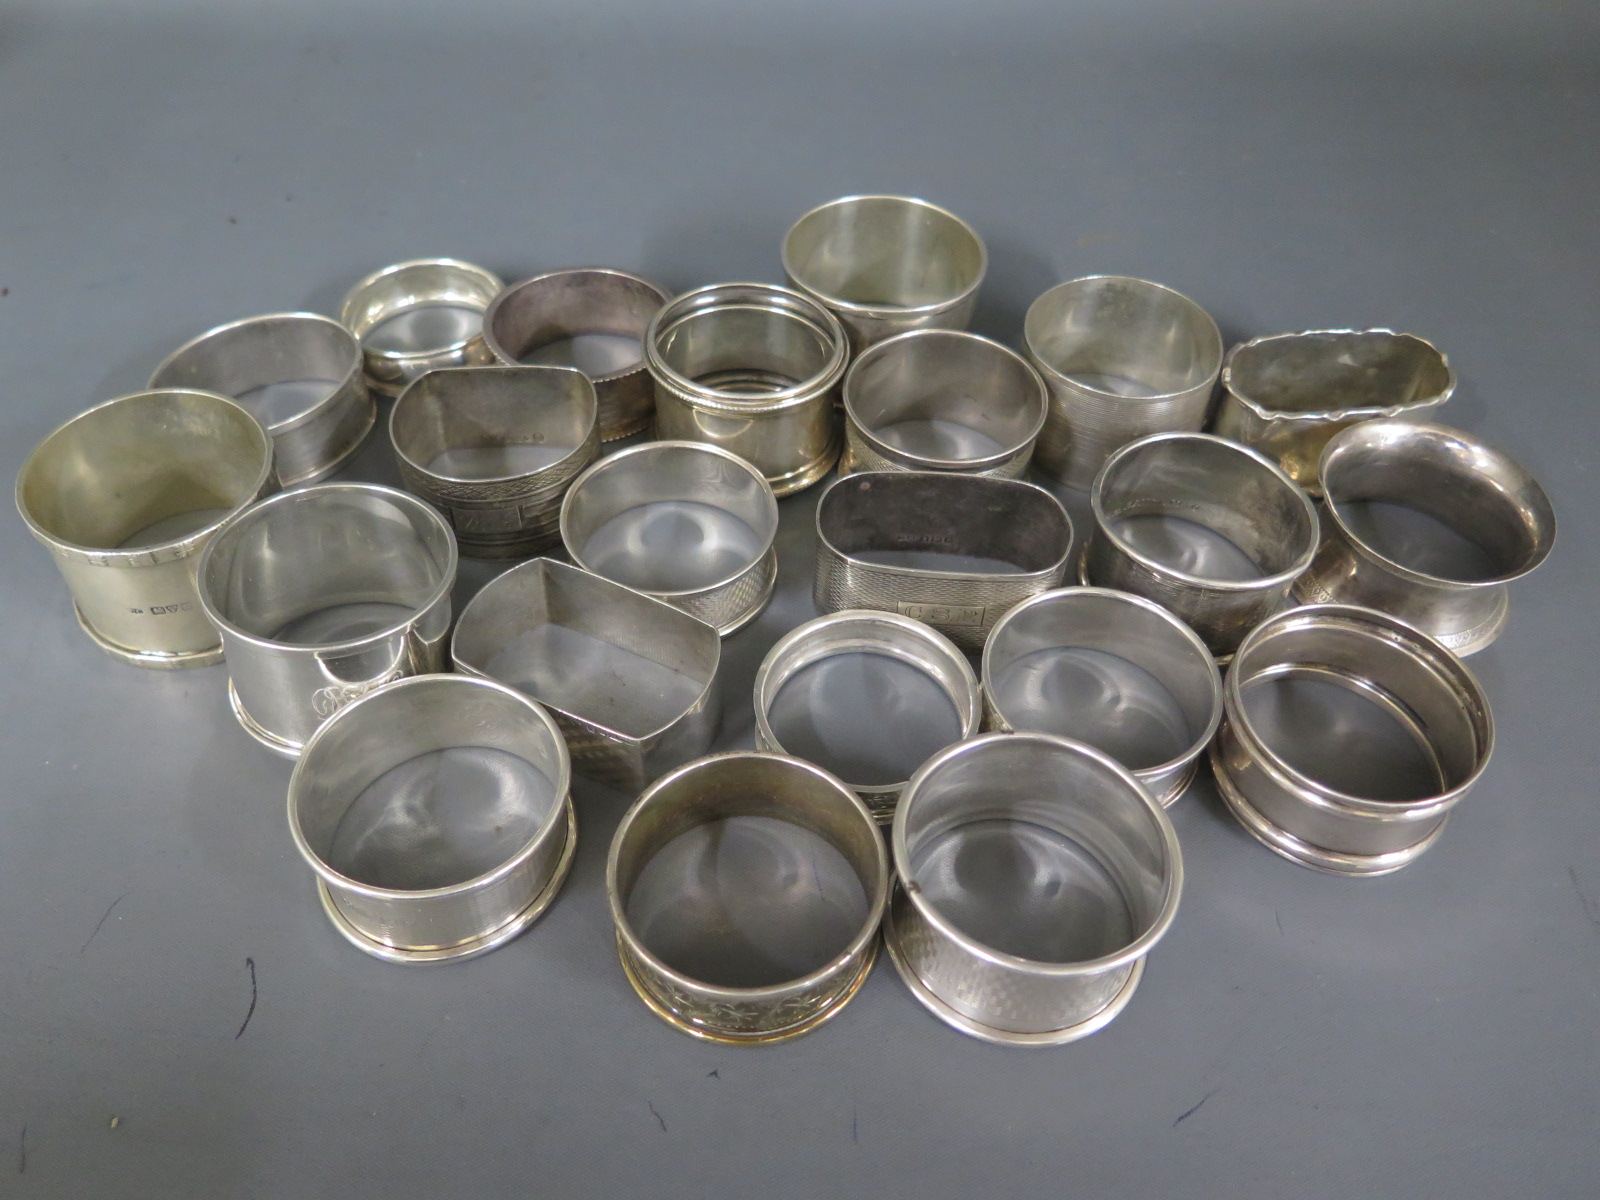 Twenty two silver hallmarked napkin rings, varying design and size - Weight approx.